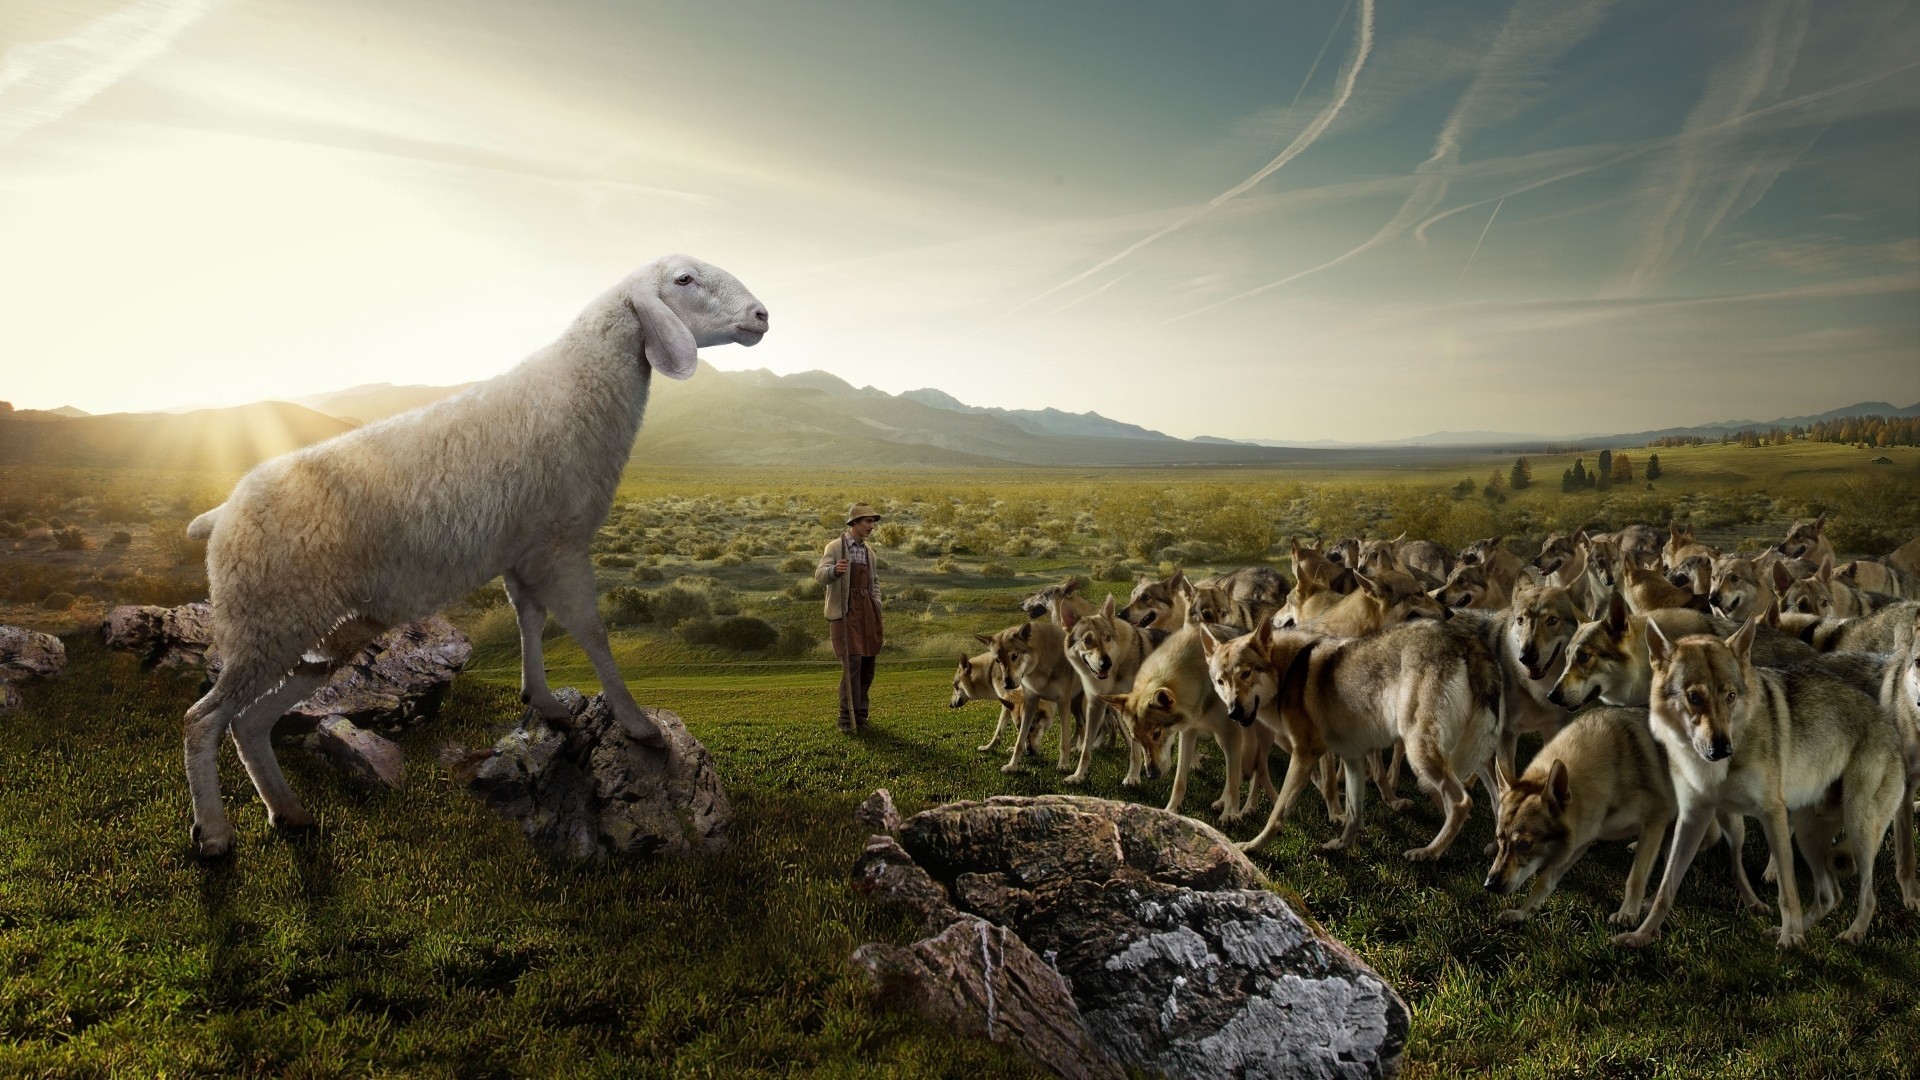 wolves, Flock, Sheep, Shepherd, Nature, Field, Sky, Rocks, Situation, Humor, Wolf, People, Men, Males, Landscapes, Sky, Mountains Wallpaper